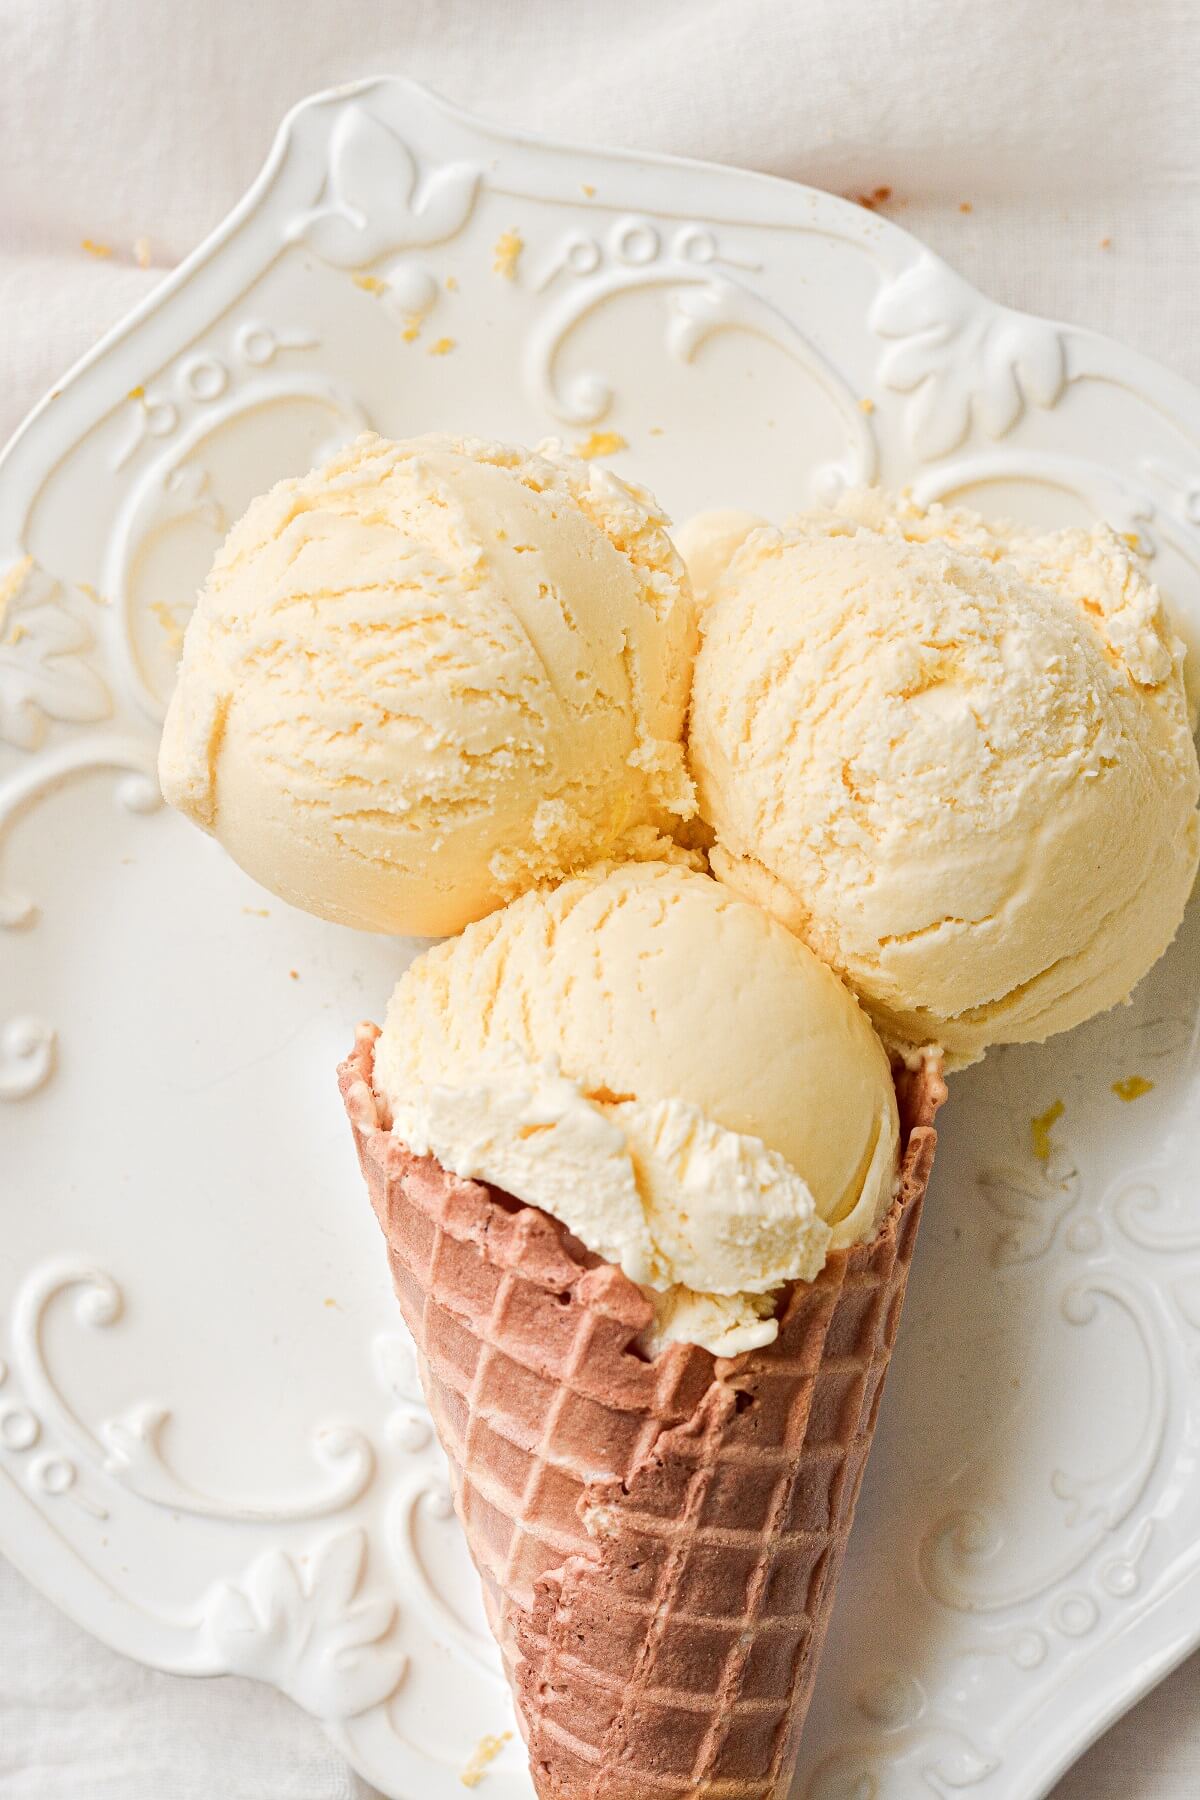 Scoops of lemon ice cream in a waffle cone, on a white plate.